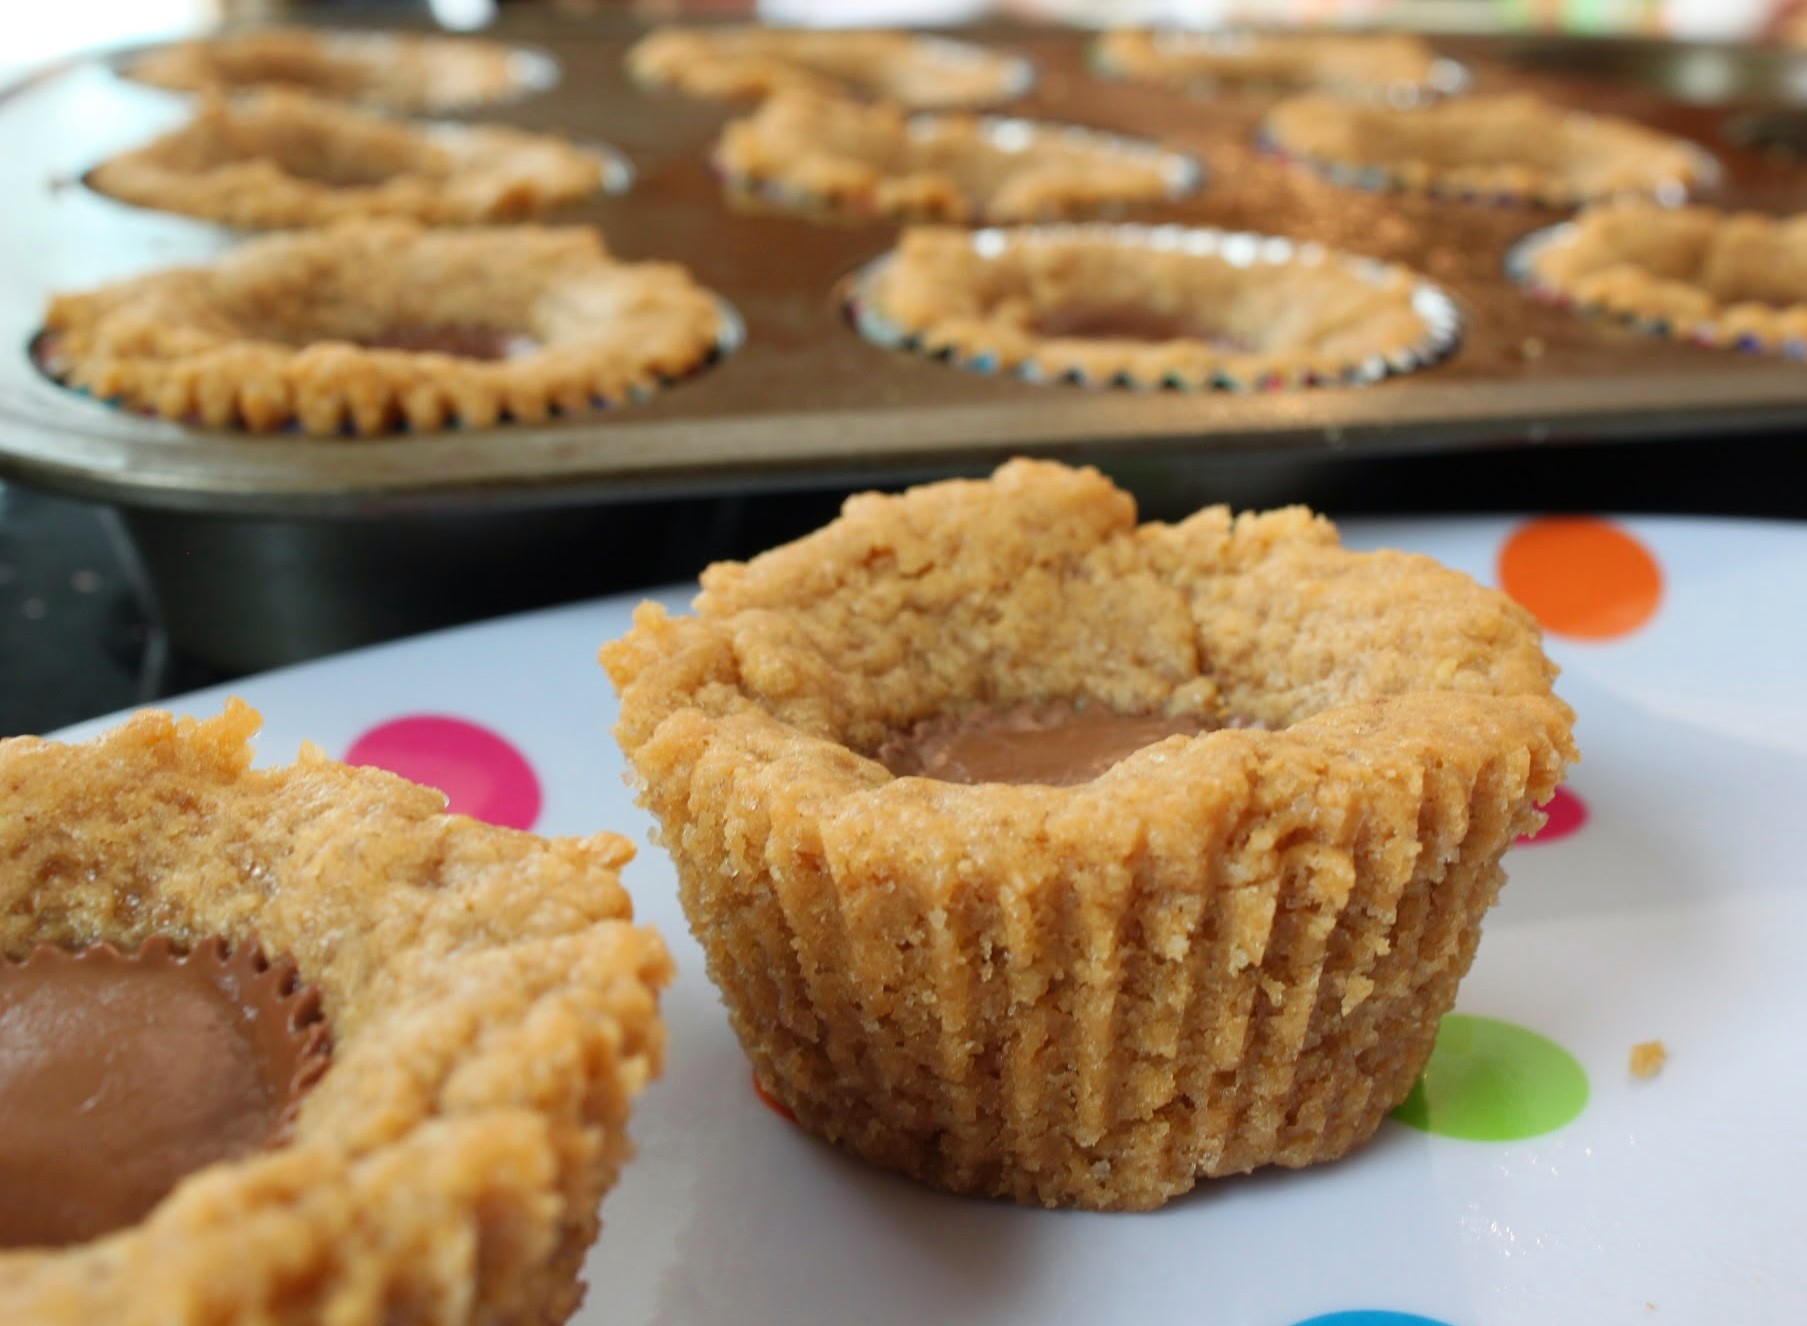 Peanut Butter Cookie Cupcakes